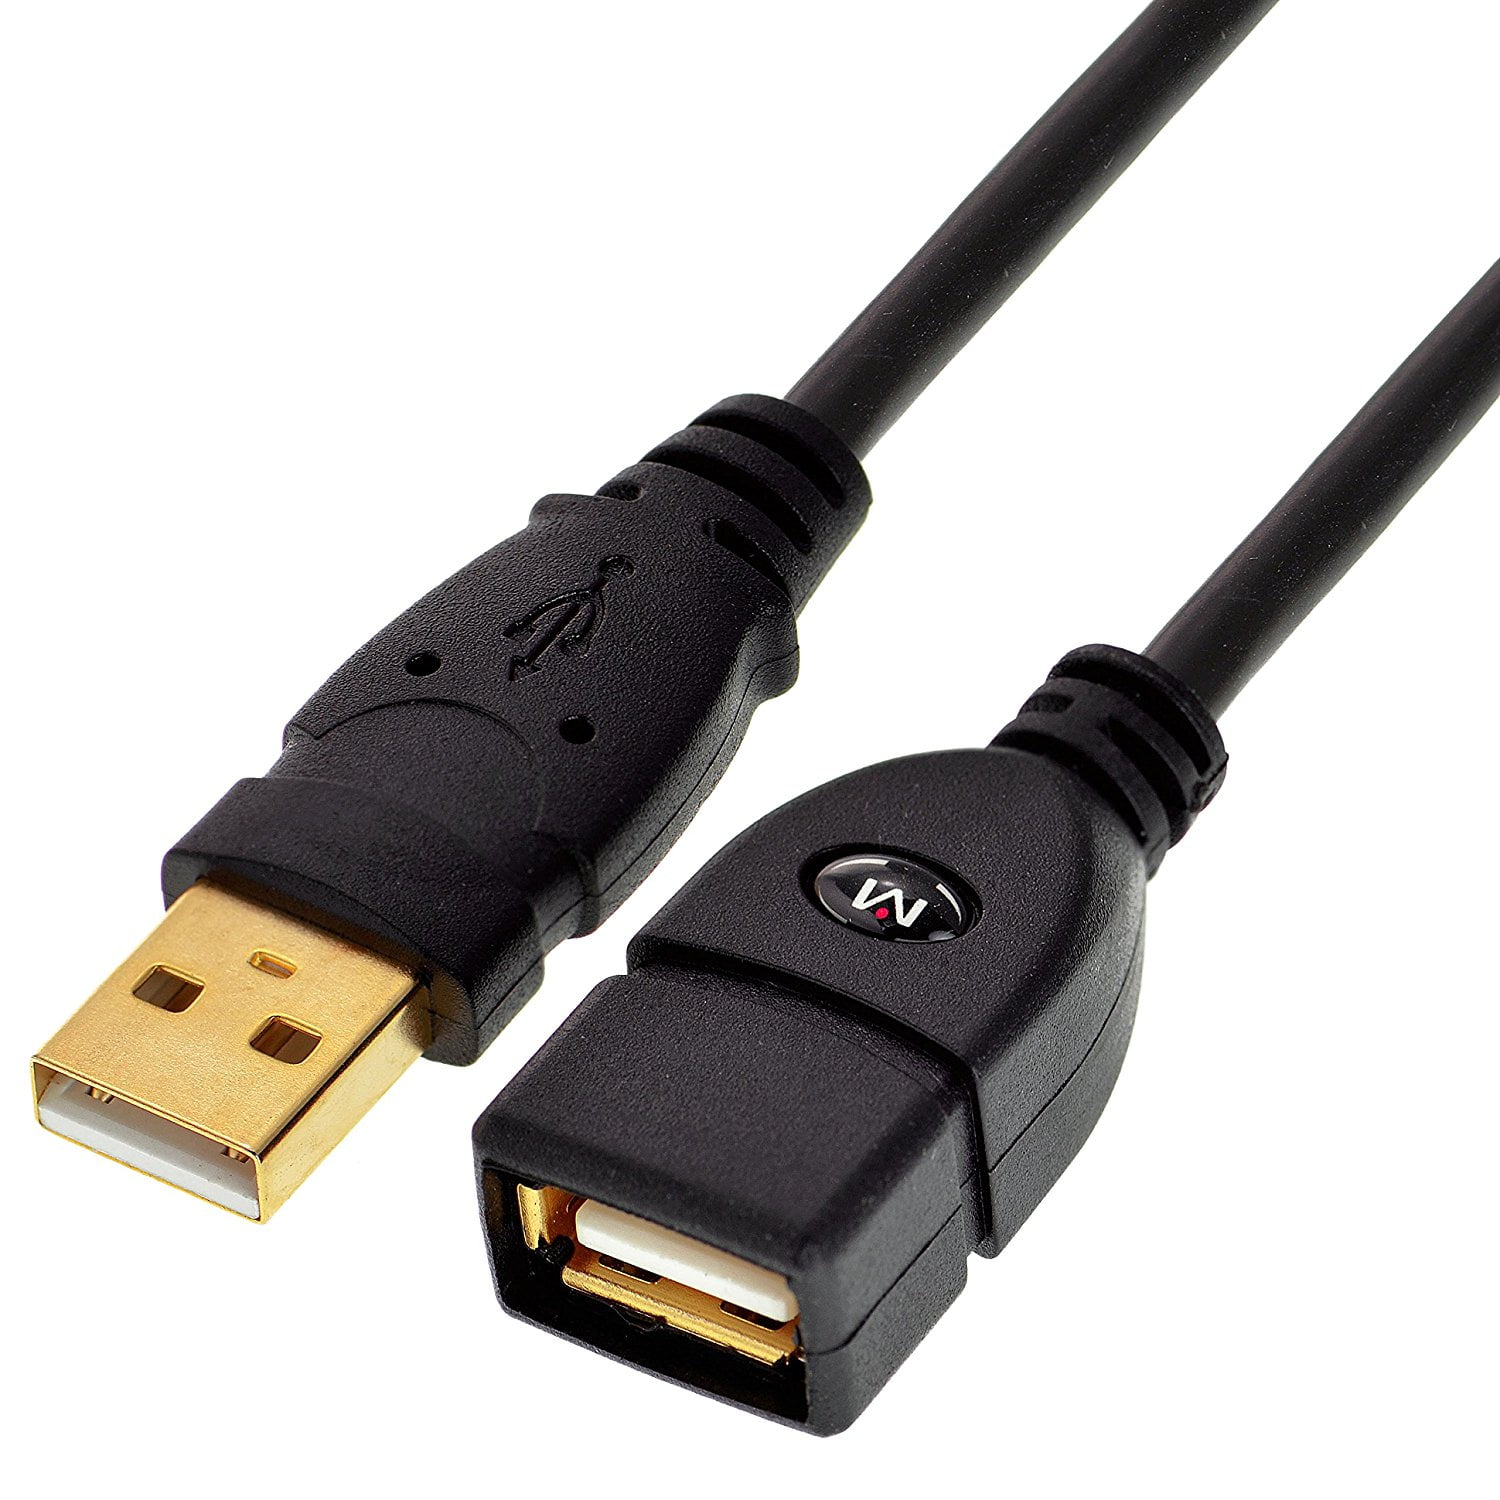 Mediabridge USB  - USB Extension Cable (6 Feet) - A Male to A Female  with Gold-Plated Contacts (Part# 30-002-06B ) 